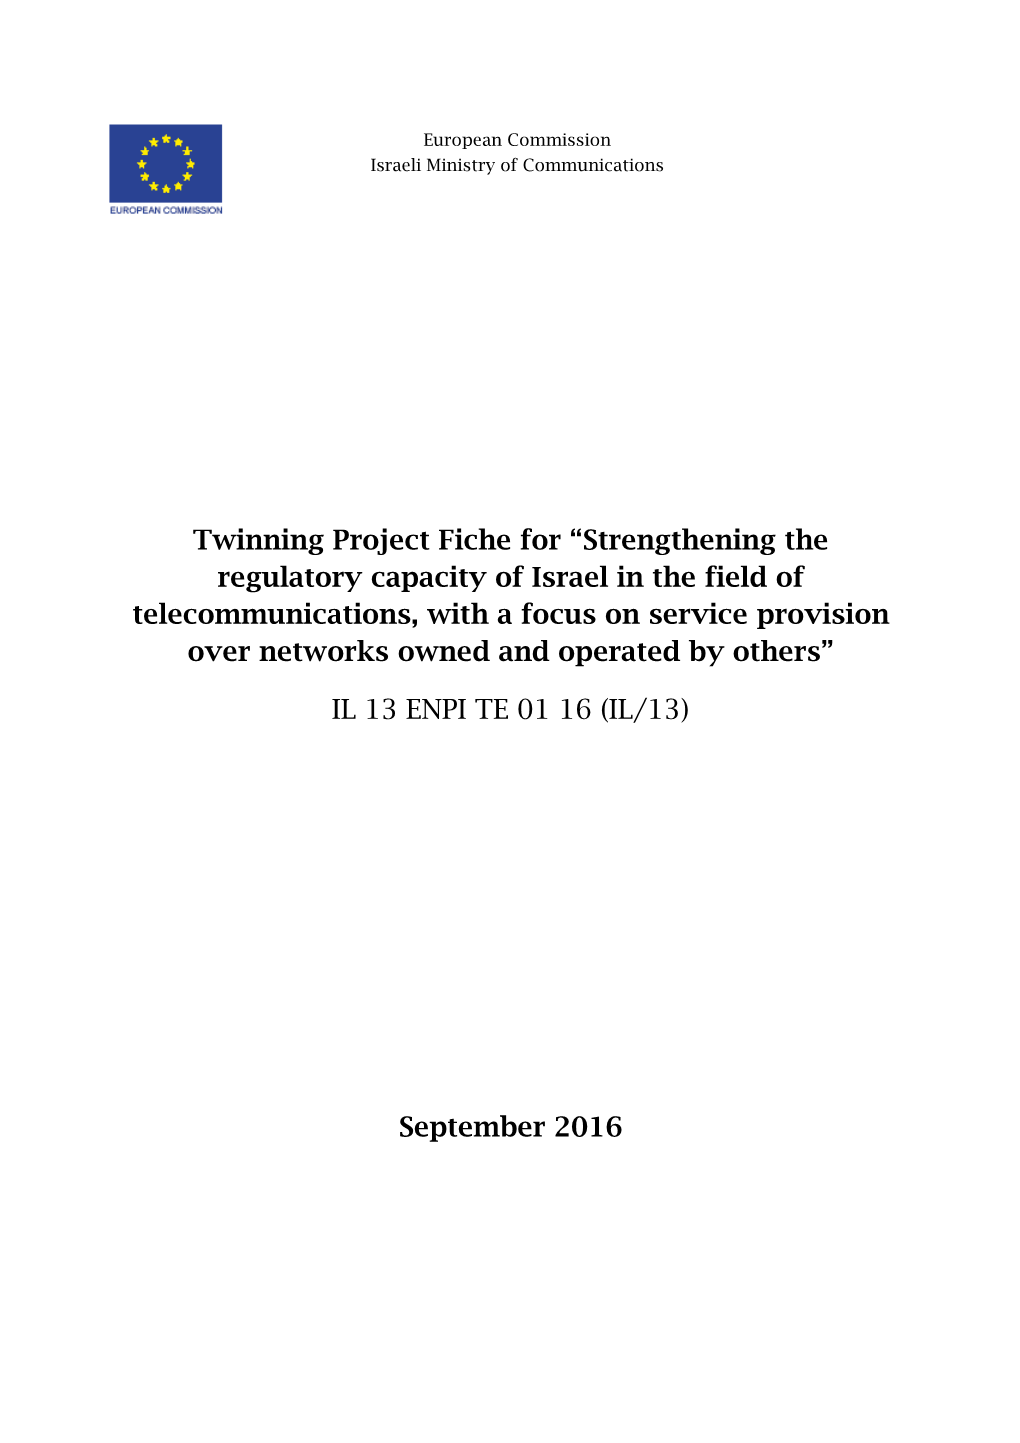 Twinning Project Fiche for “Strengthening